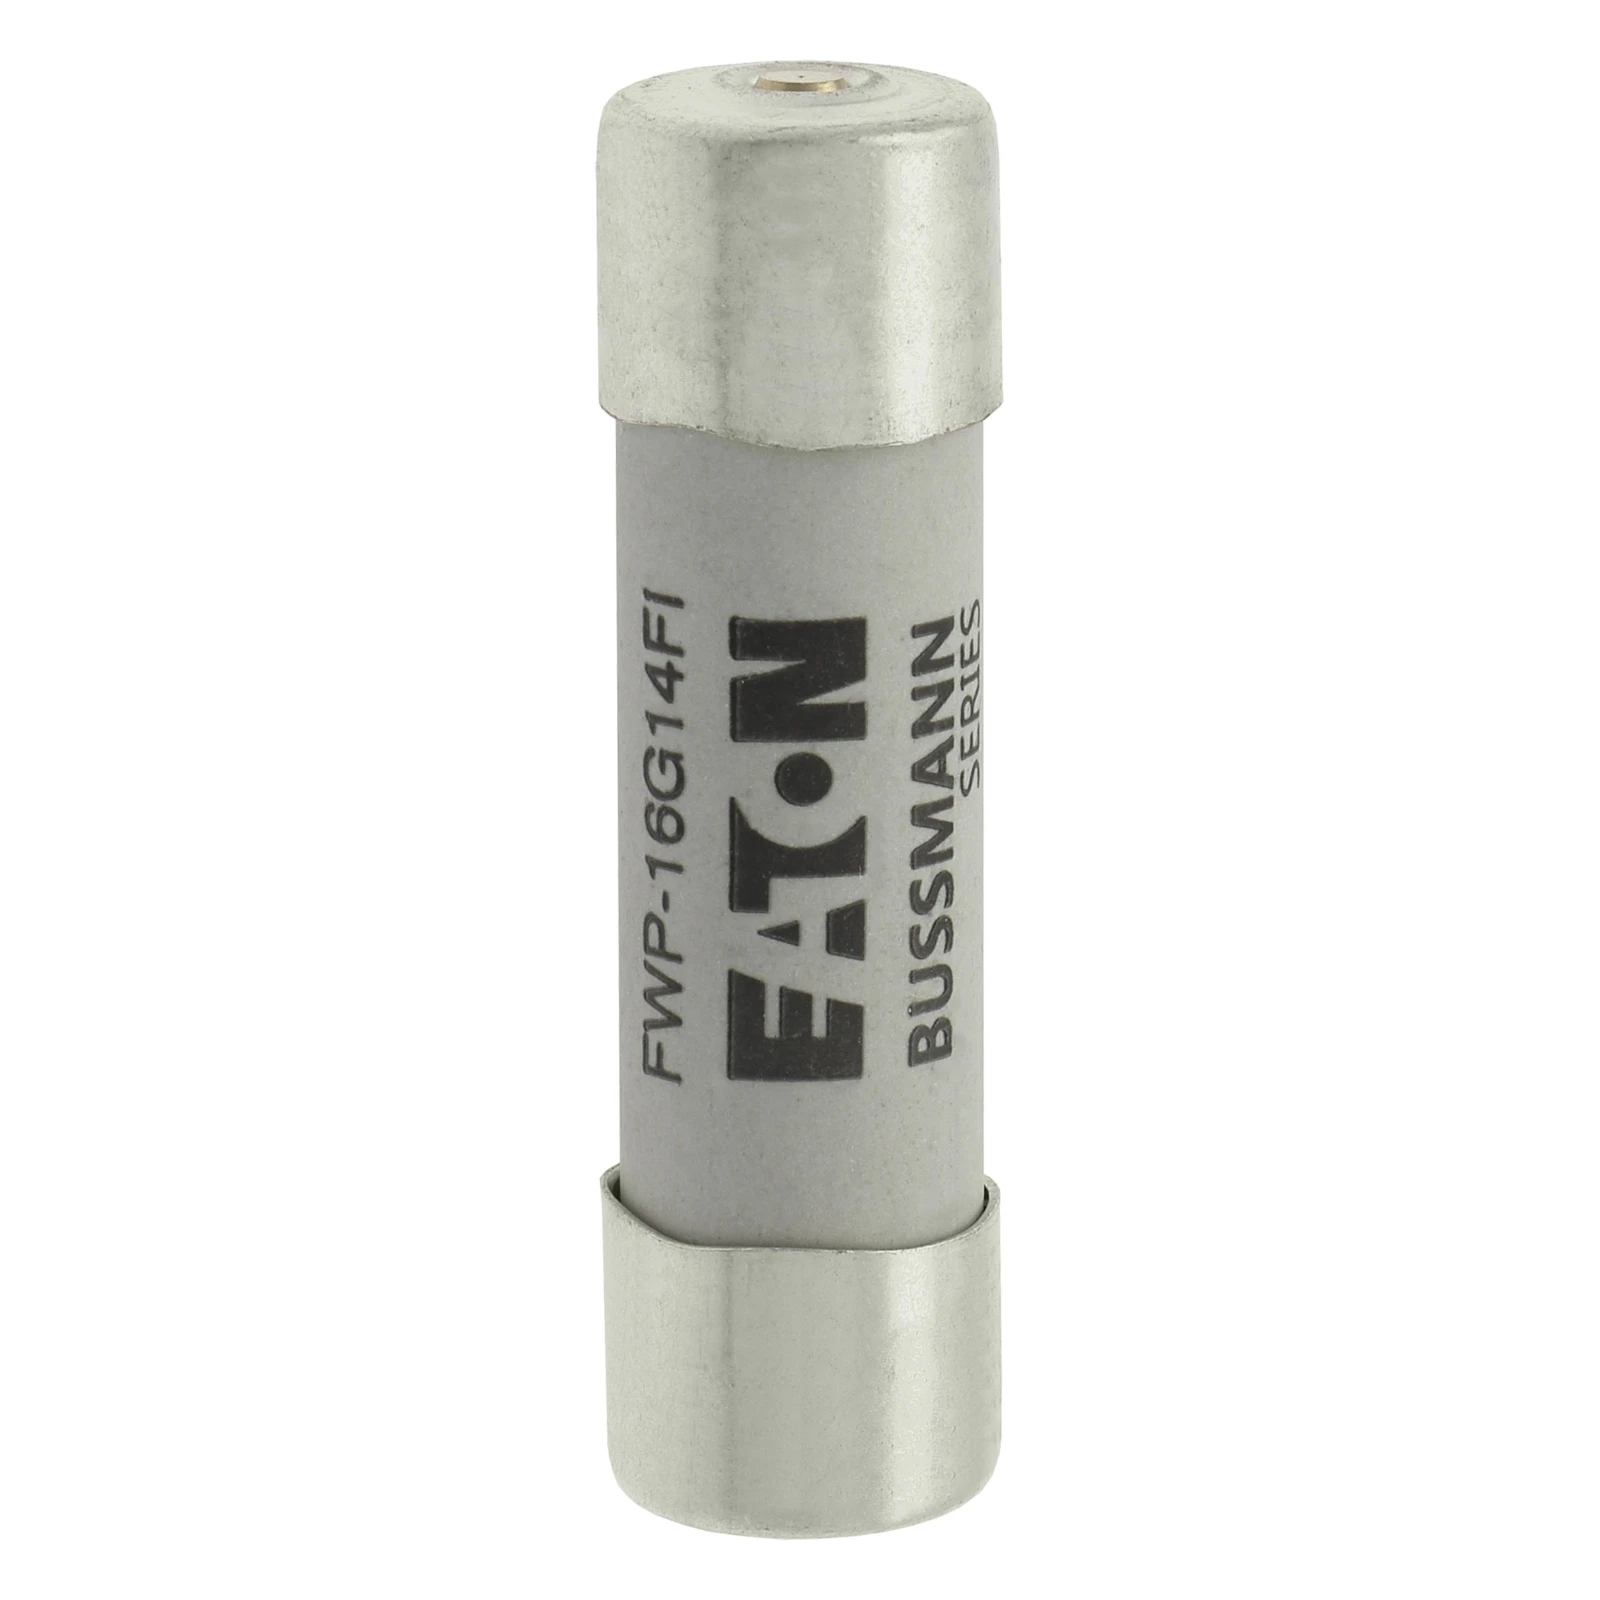 2545502 - Eaton Fuse 16A 690VAC gR 14x51 with Ind